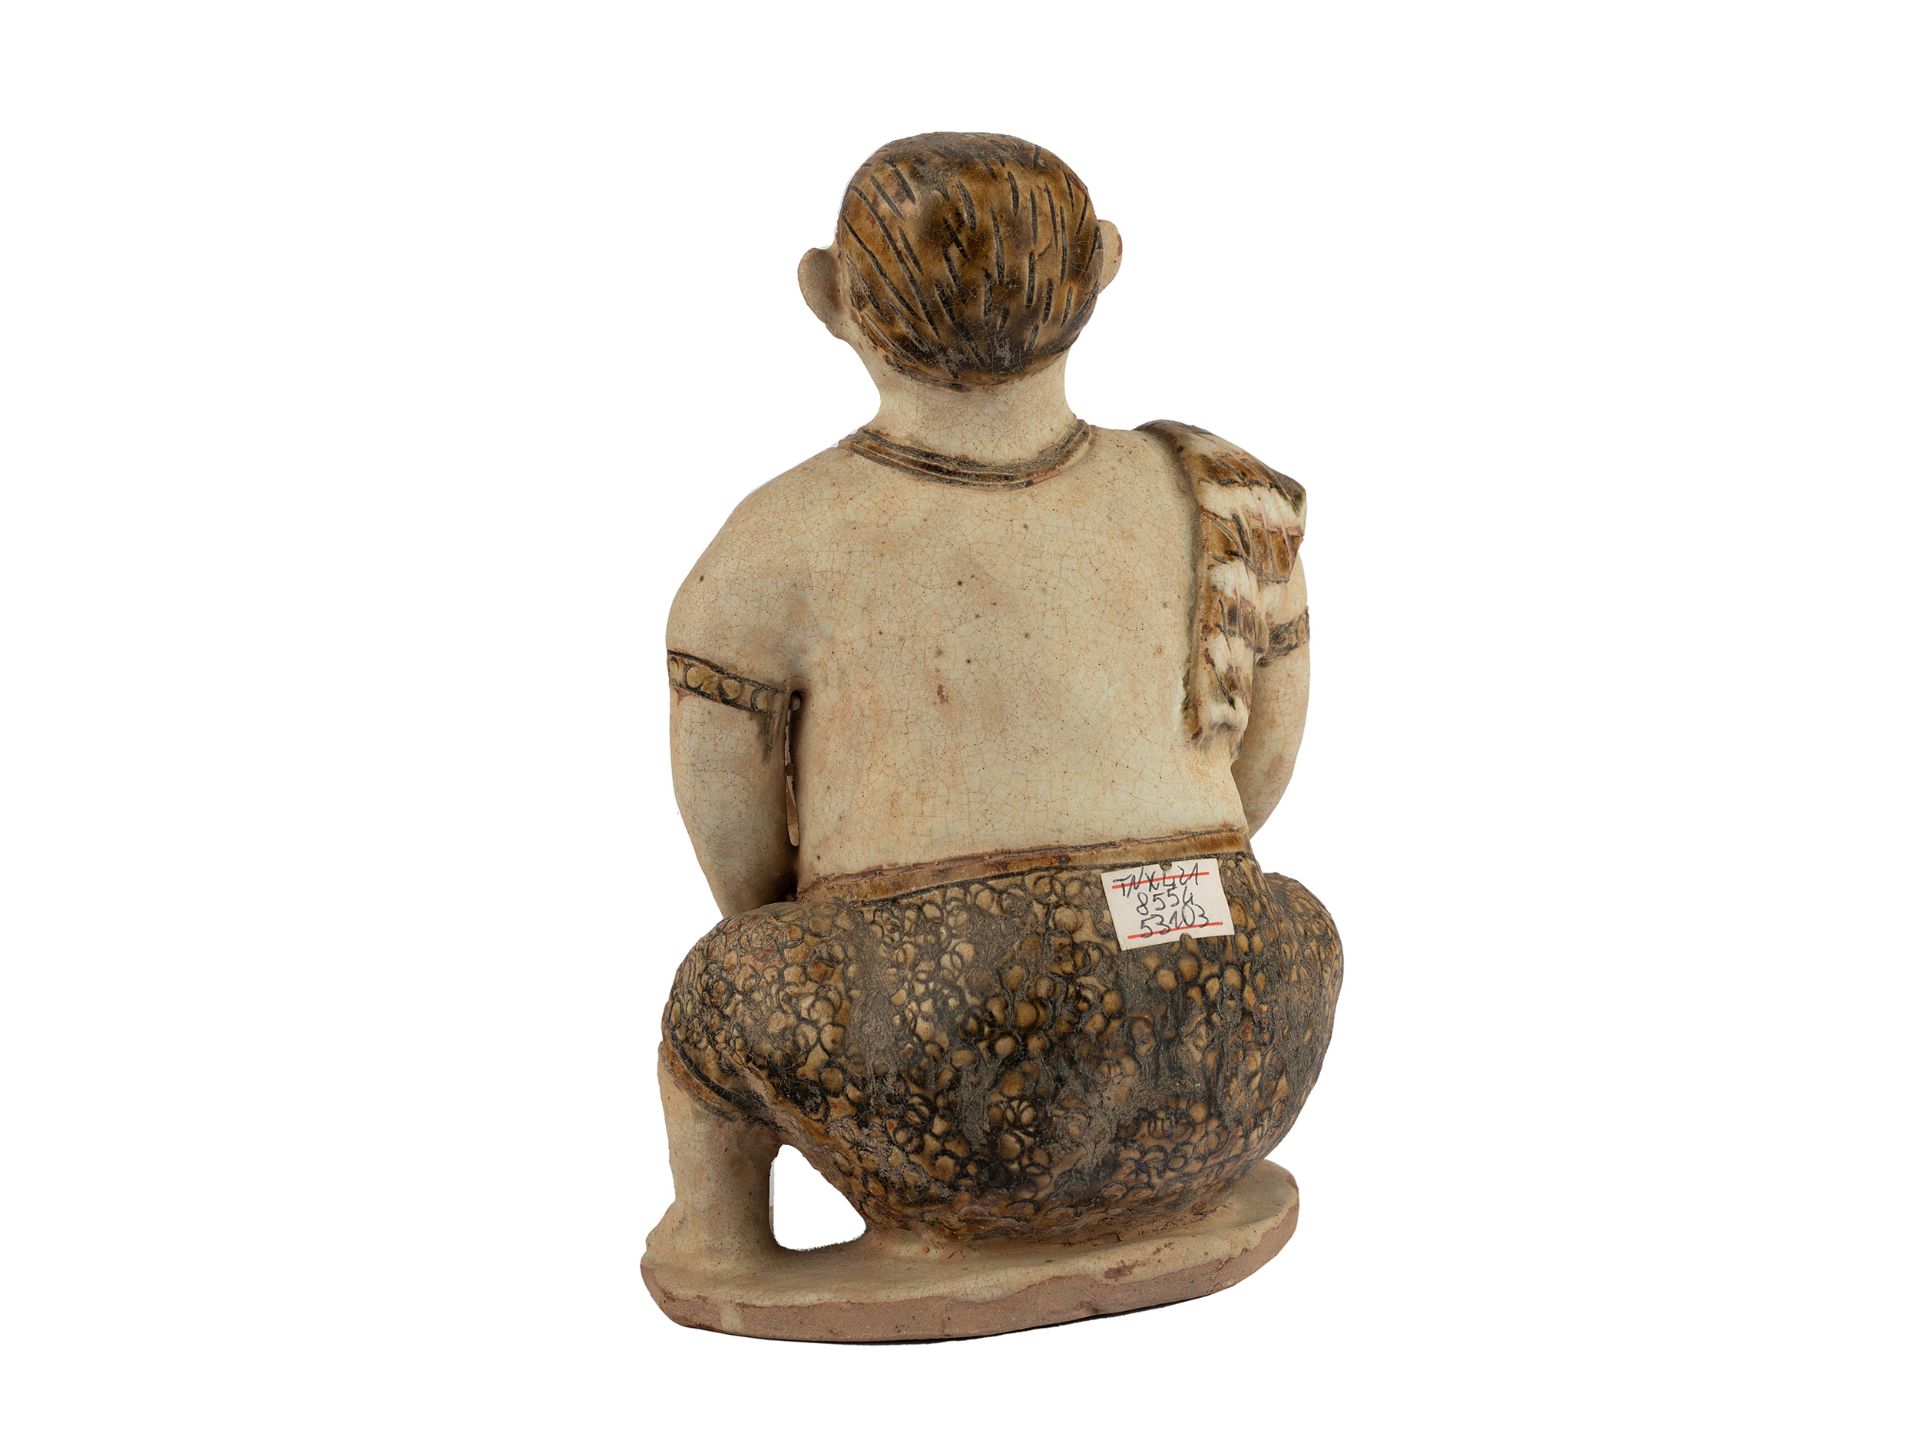 Water dropper in the shape of a hunchback, Thailand, In the Sawankhalok style of the 15th-16th c. - Image 4 of 5